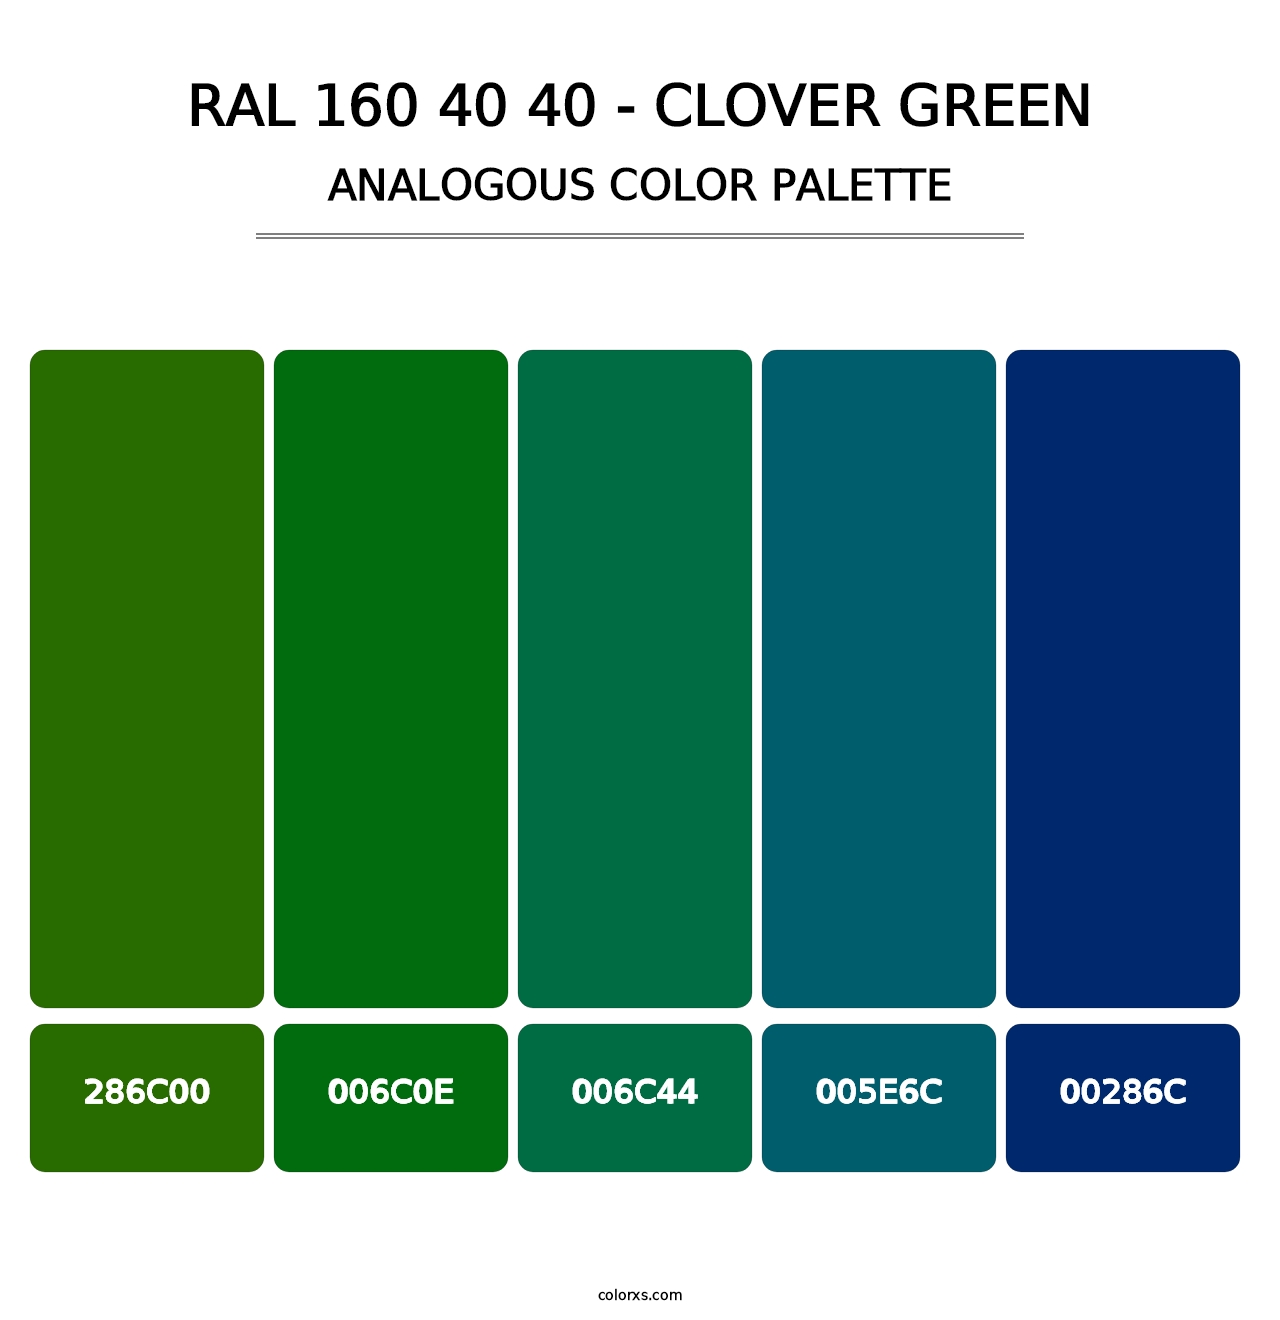 RAL 160 40 40 - Clover Green - Analogous Color Palette